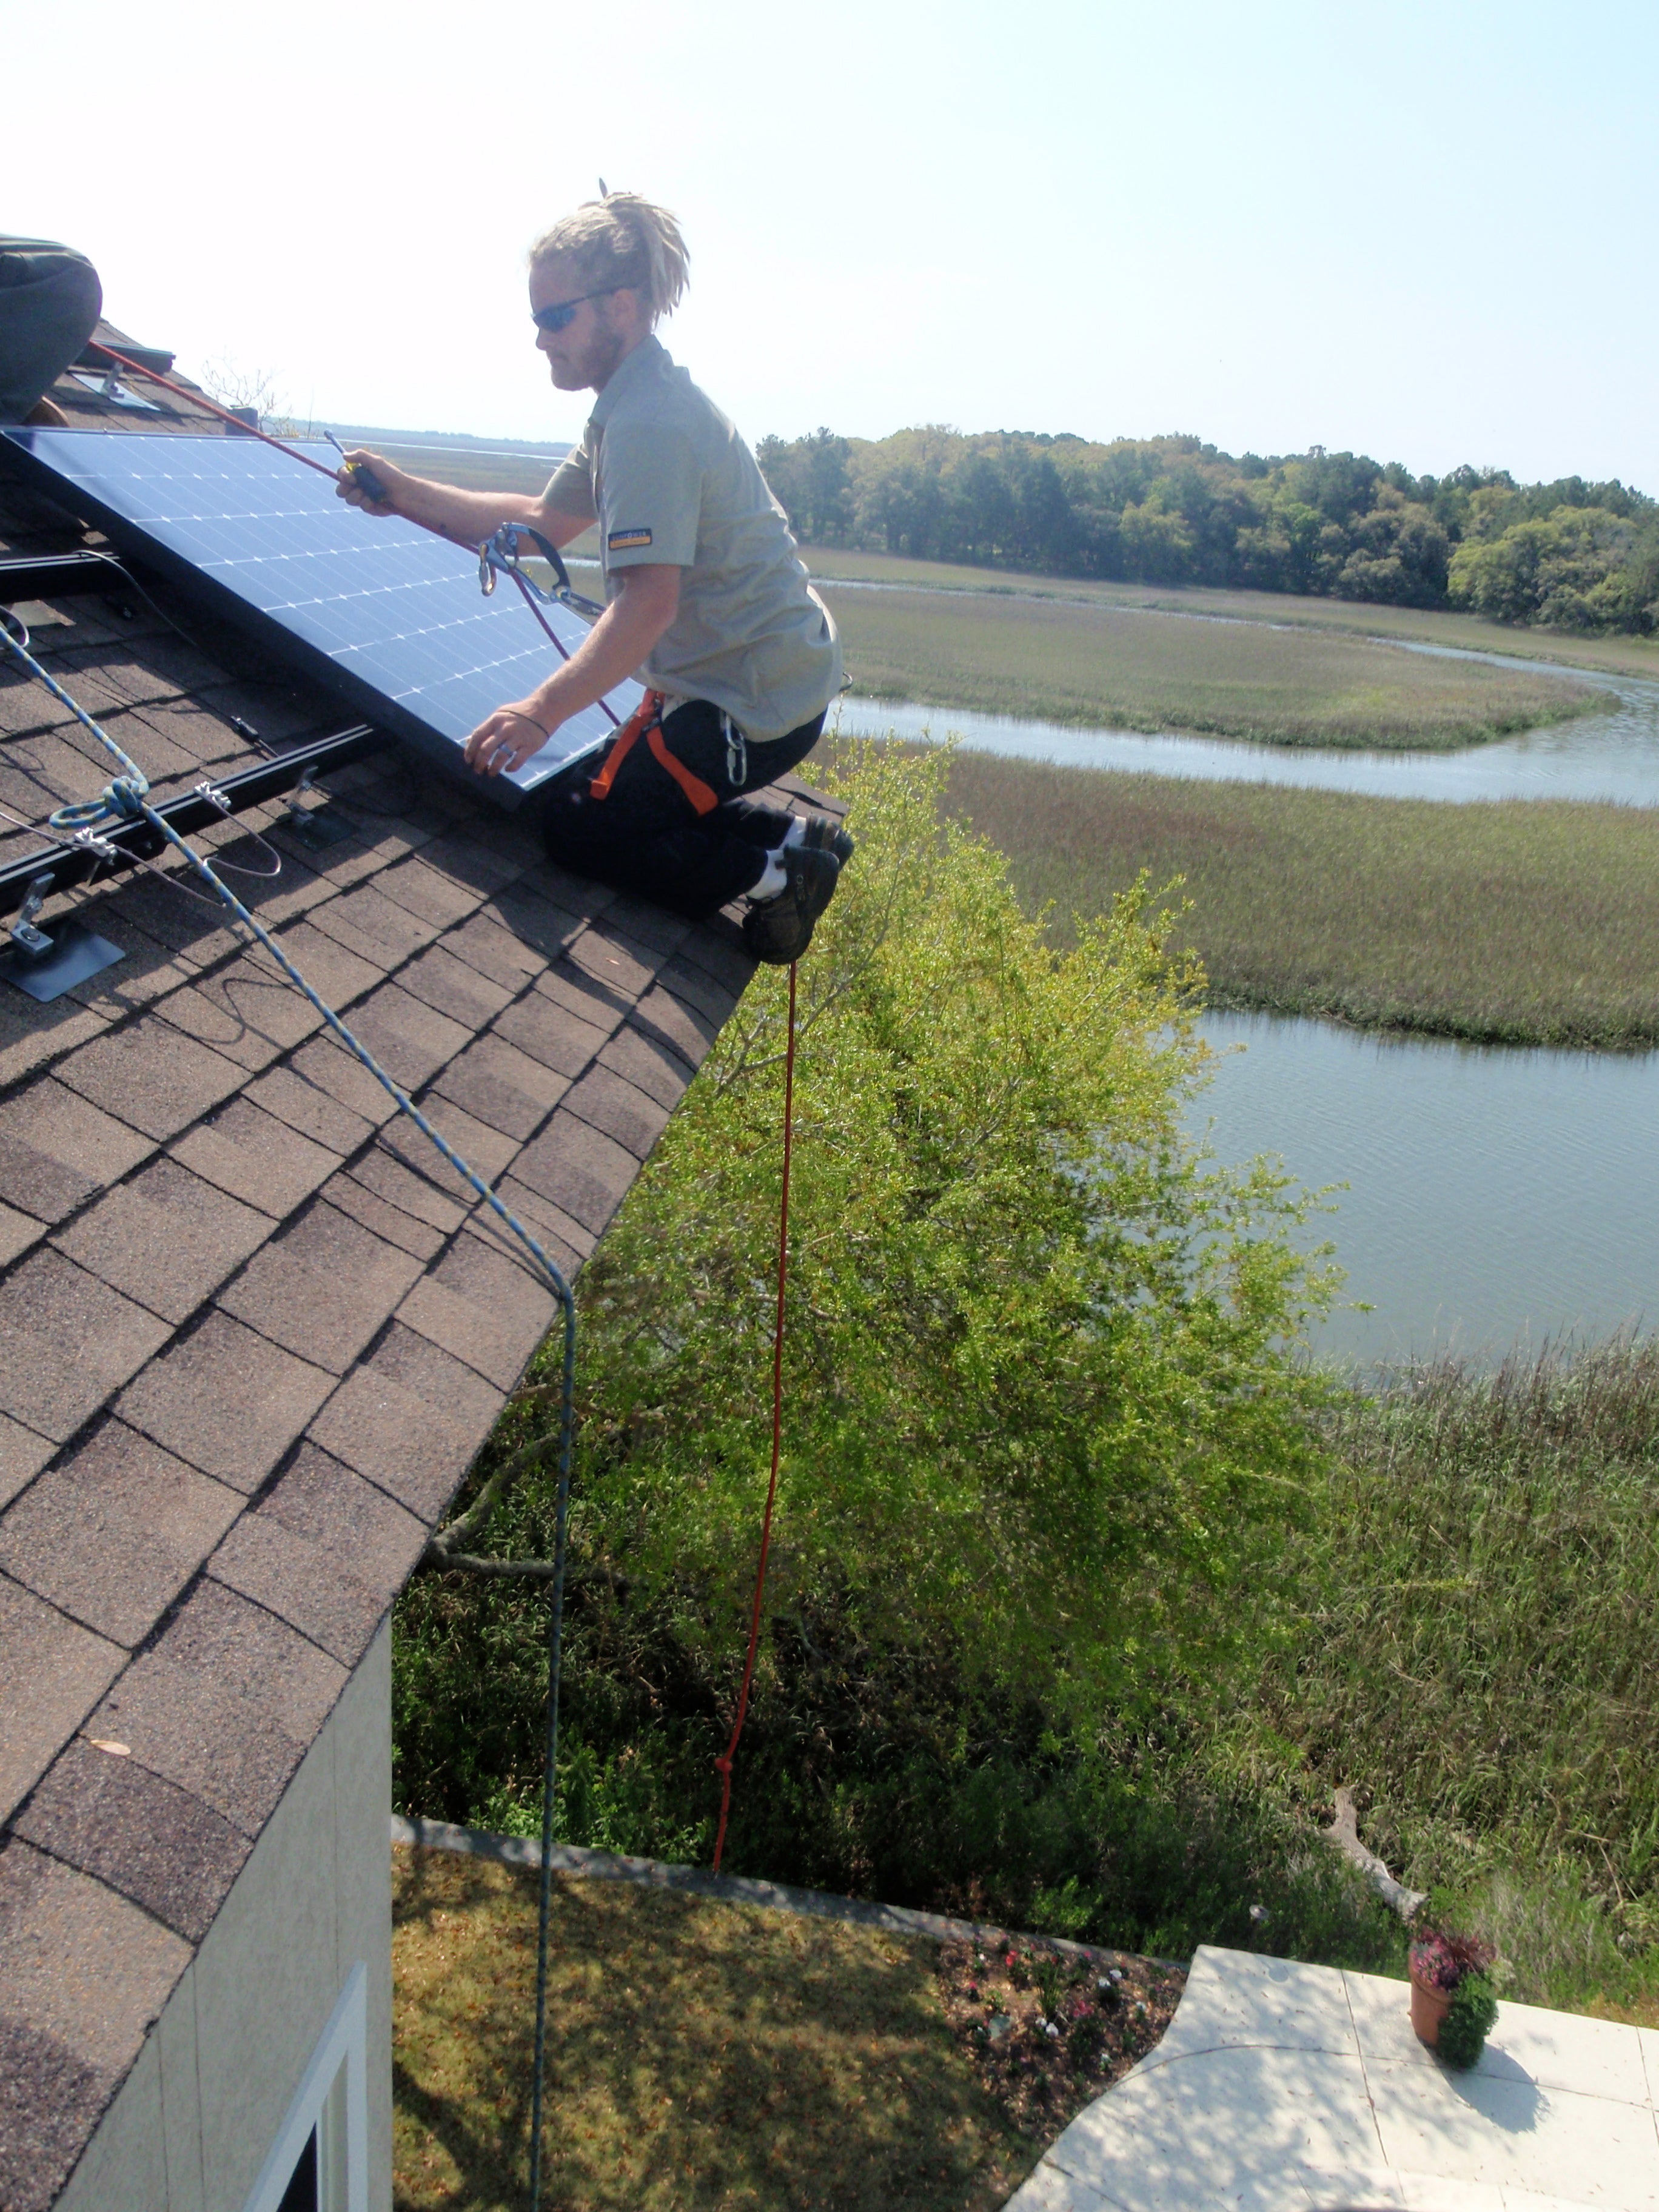 Our installer Glen getting the job done safely in Charleston SC